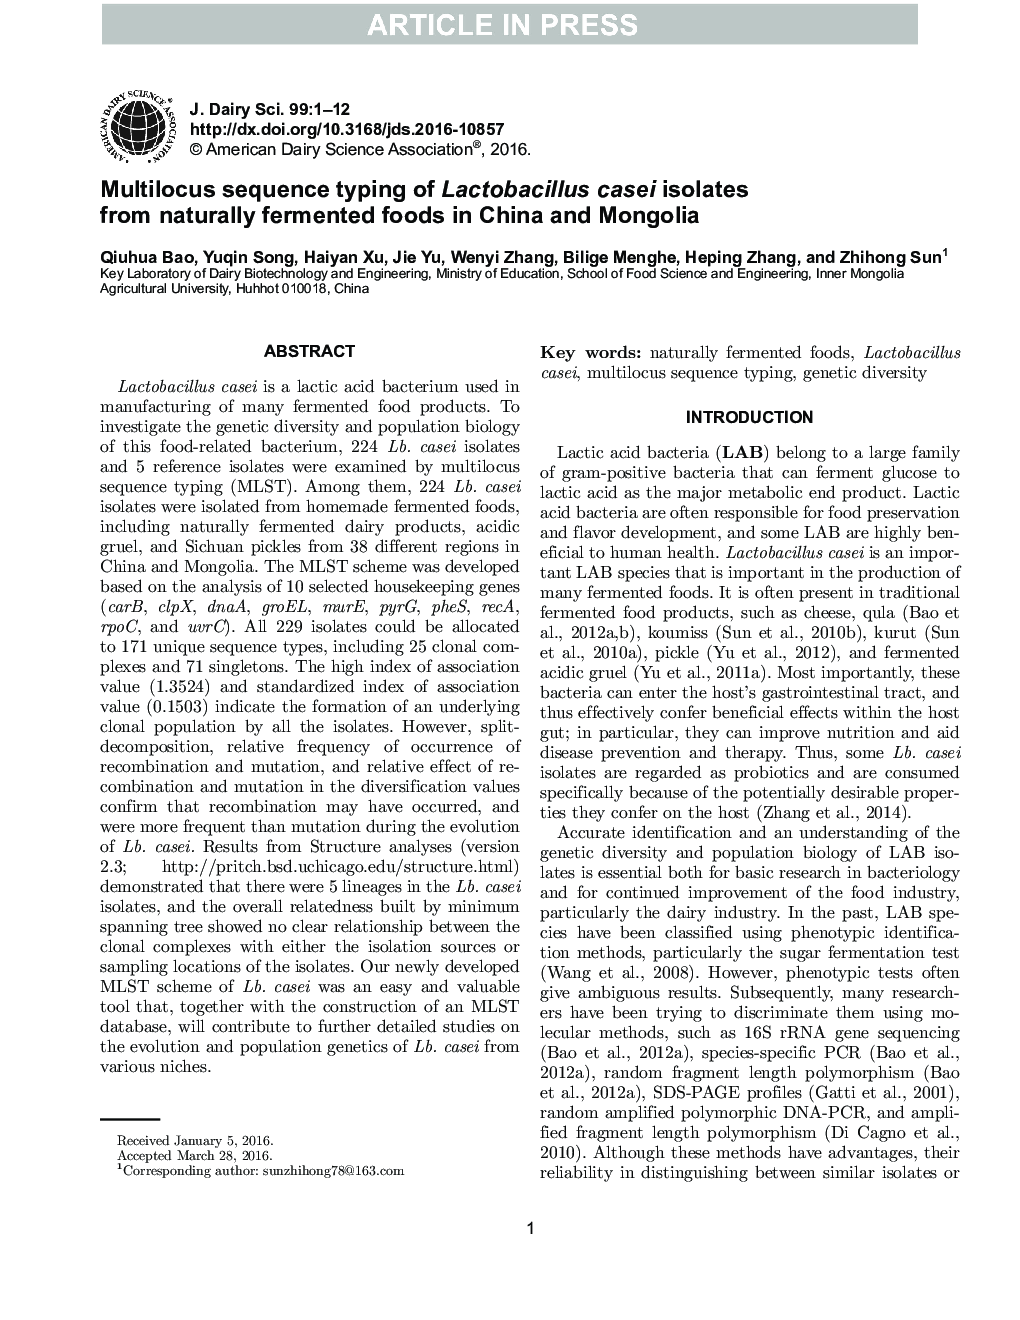 Multilocus sequence typing of Lactobacillus casei isolates from naturally fermented foods in China and Mongolia